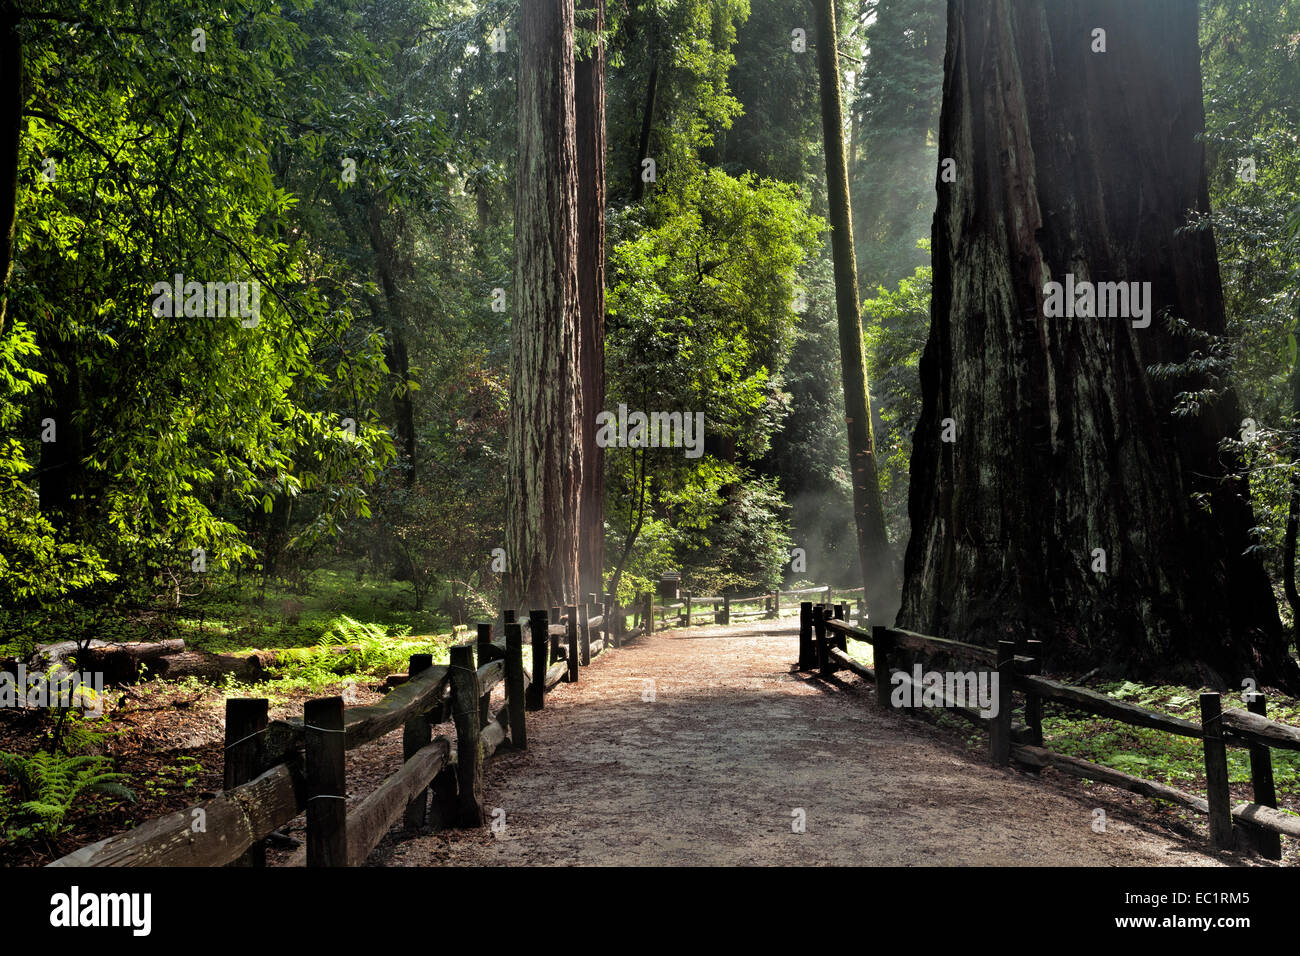 CA02449-00...CALIFORNIA - Redwood alberi lungo il Redwood Grove Loop Trail in Henry Cowell Redwoods State Park. Foto Stock